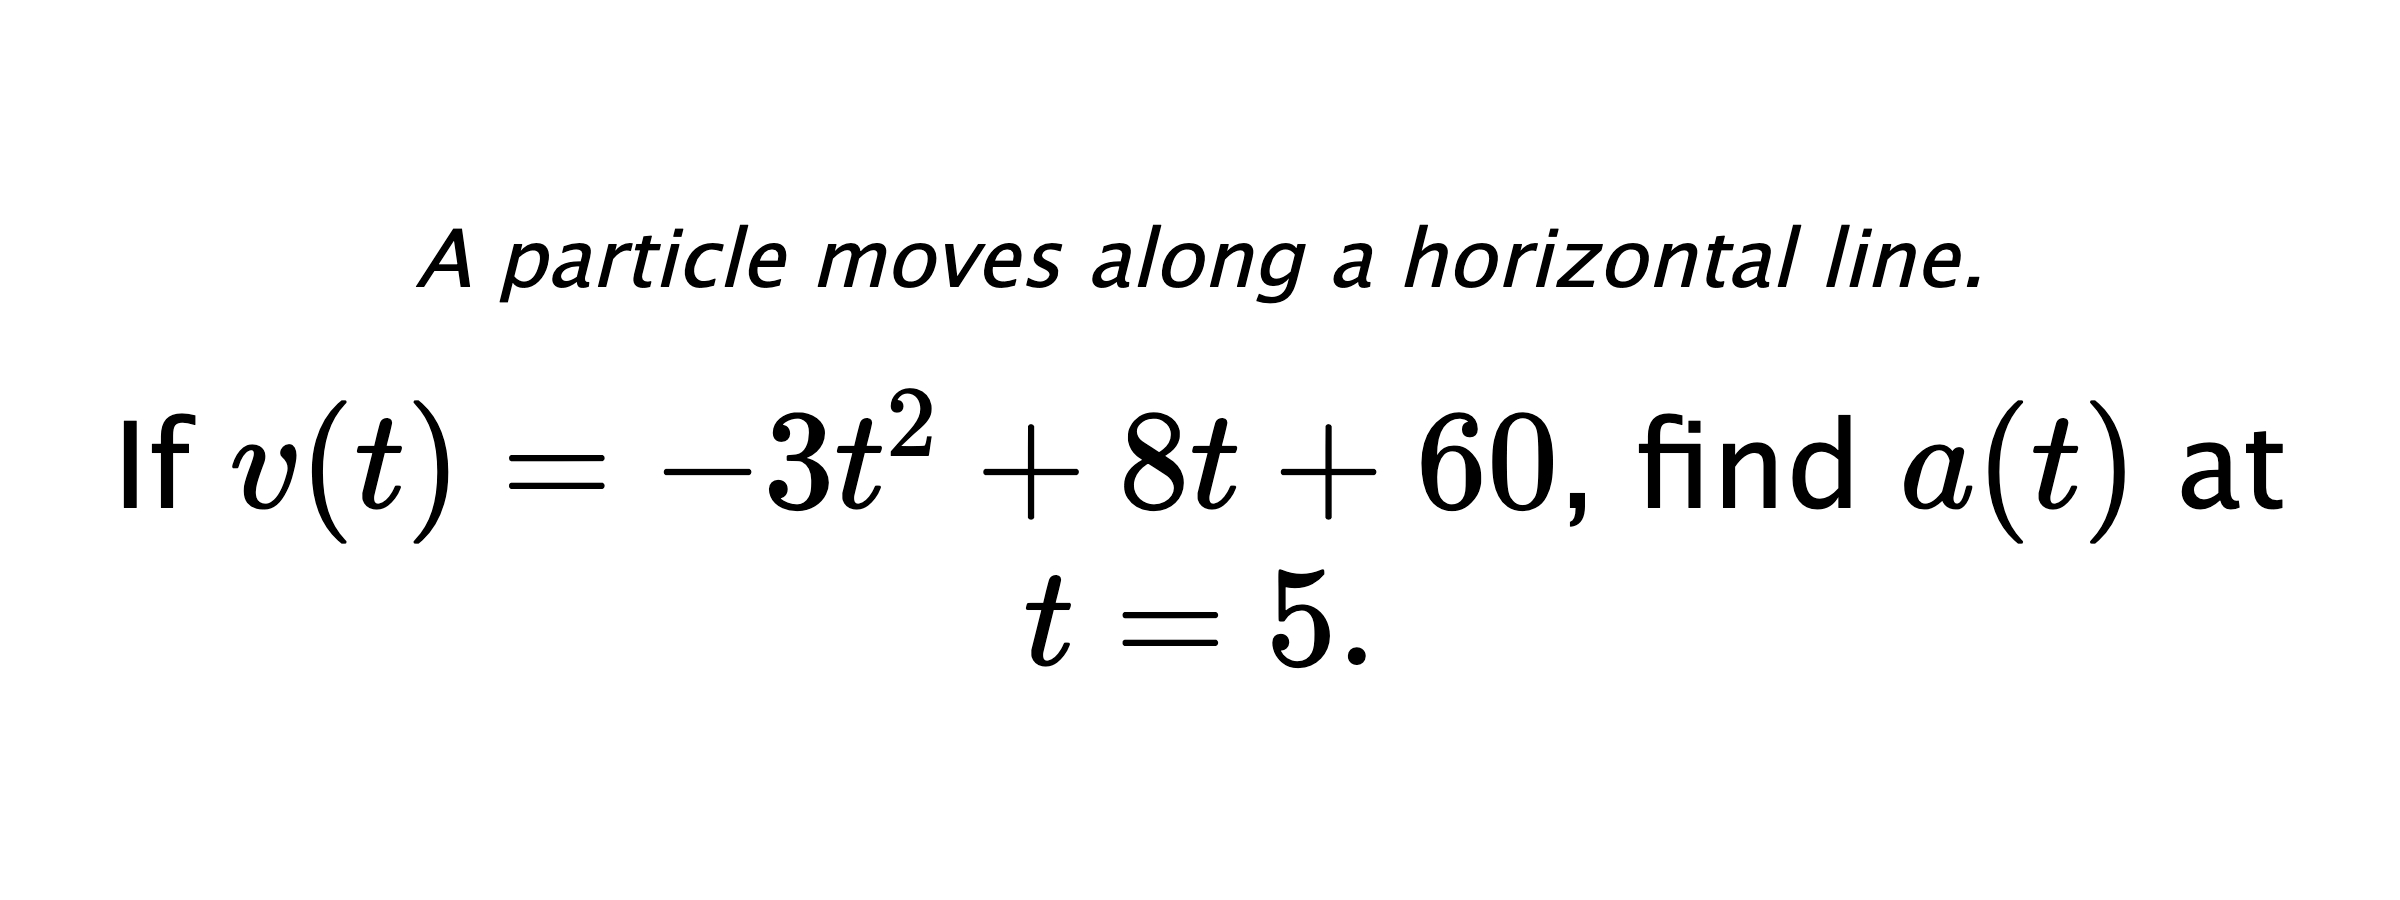 A particle moves along a horizontal line. If $ v(t)=-3t^2+8t+60 $, find $ a(t) $ at $ t=5 .$